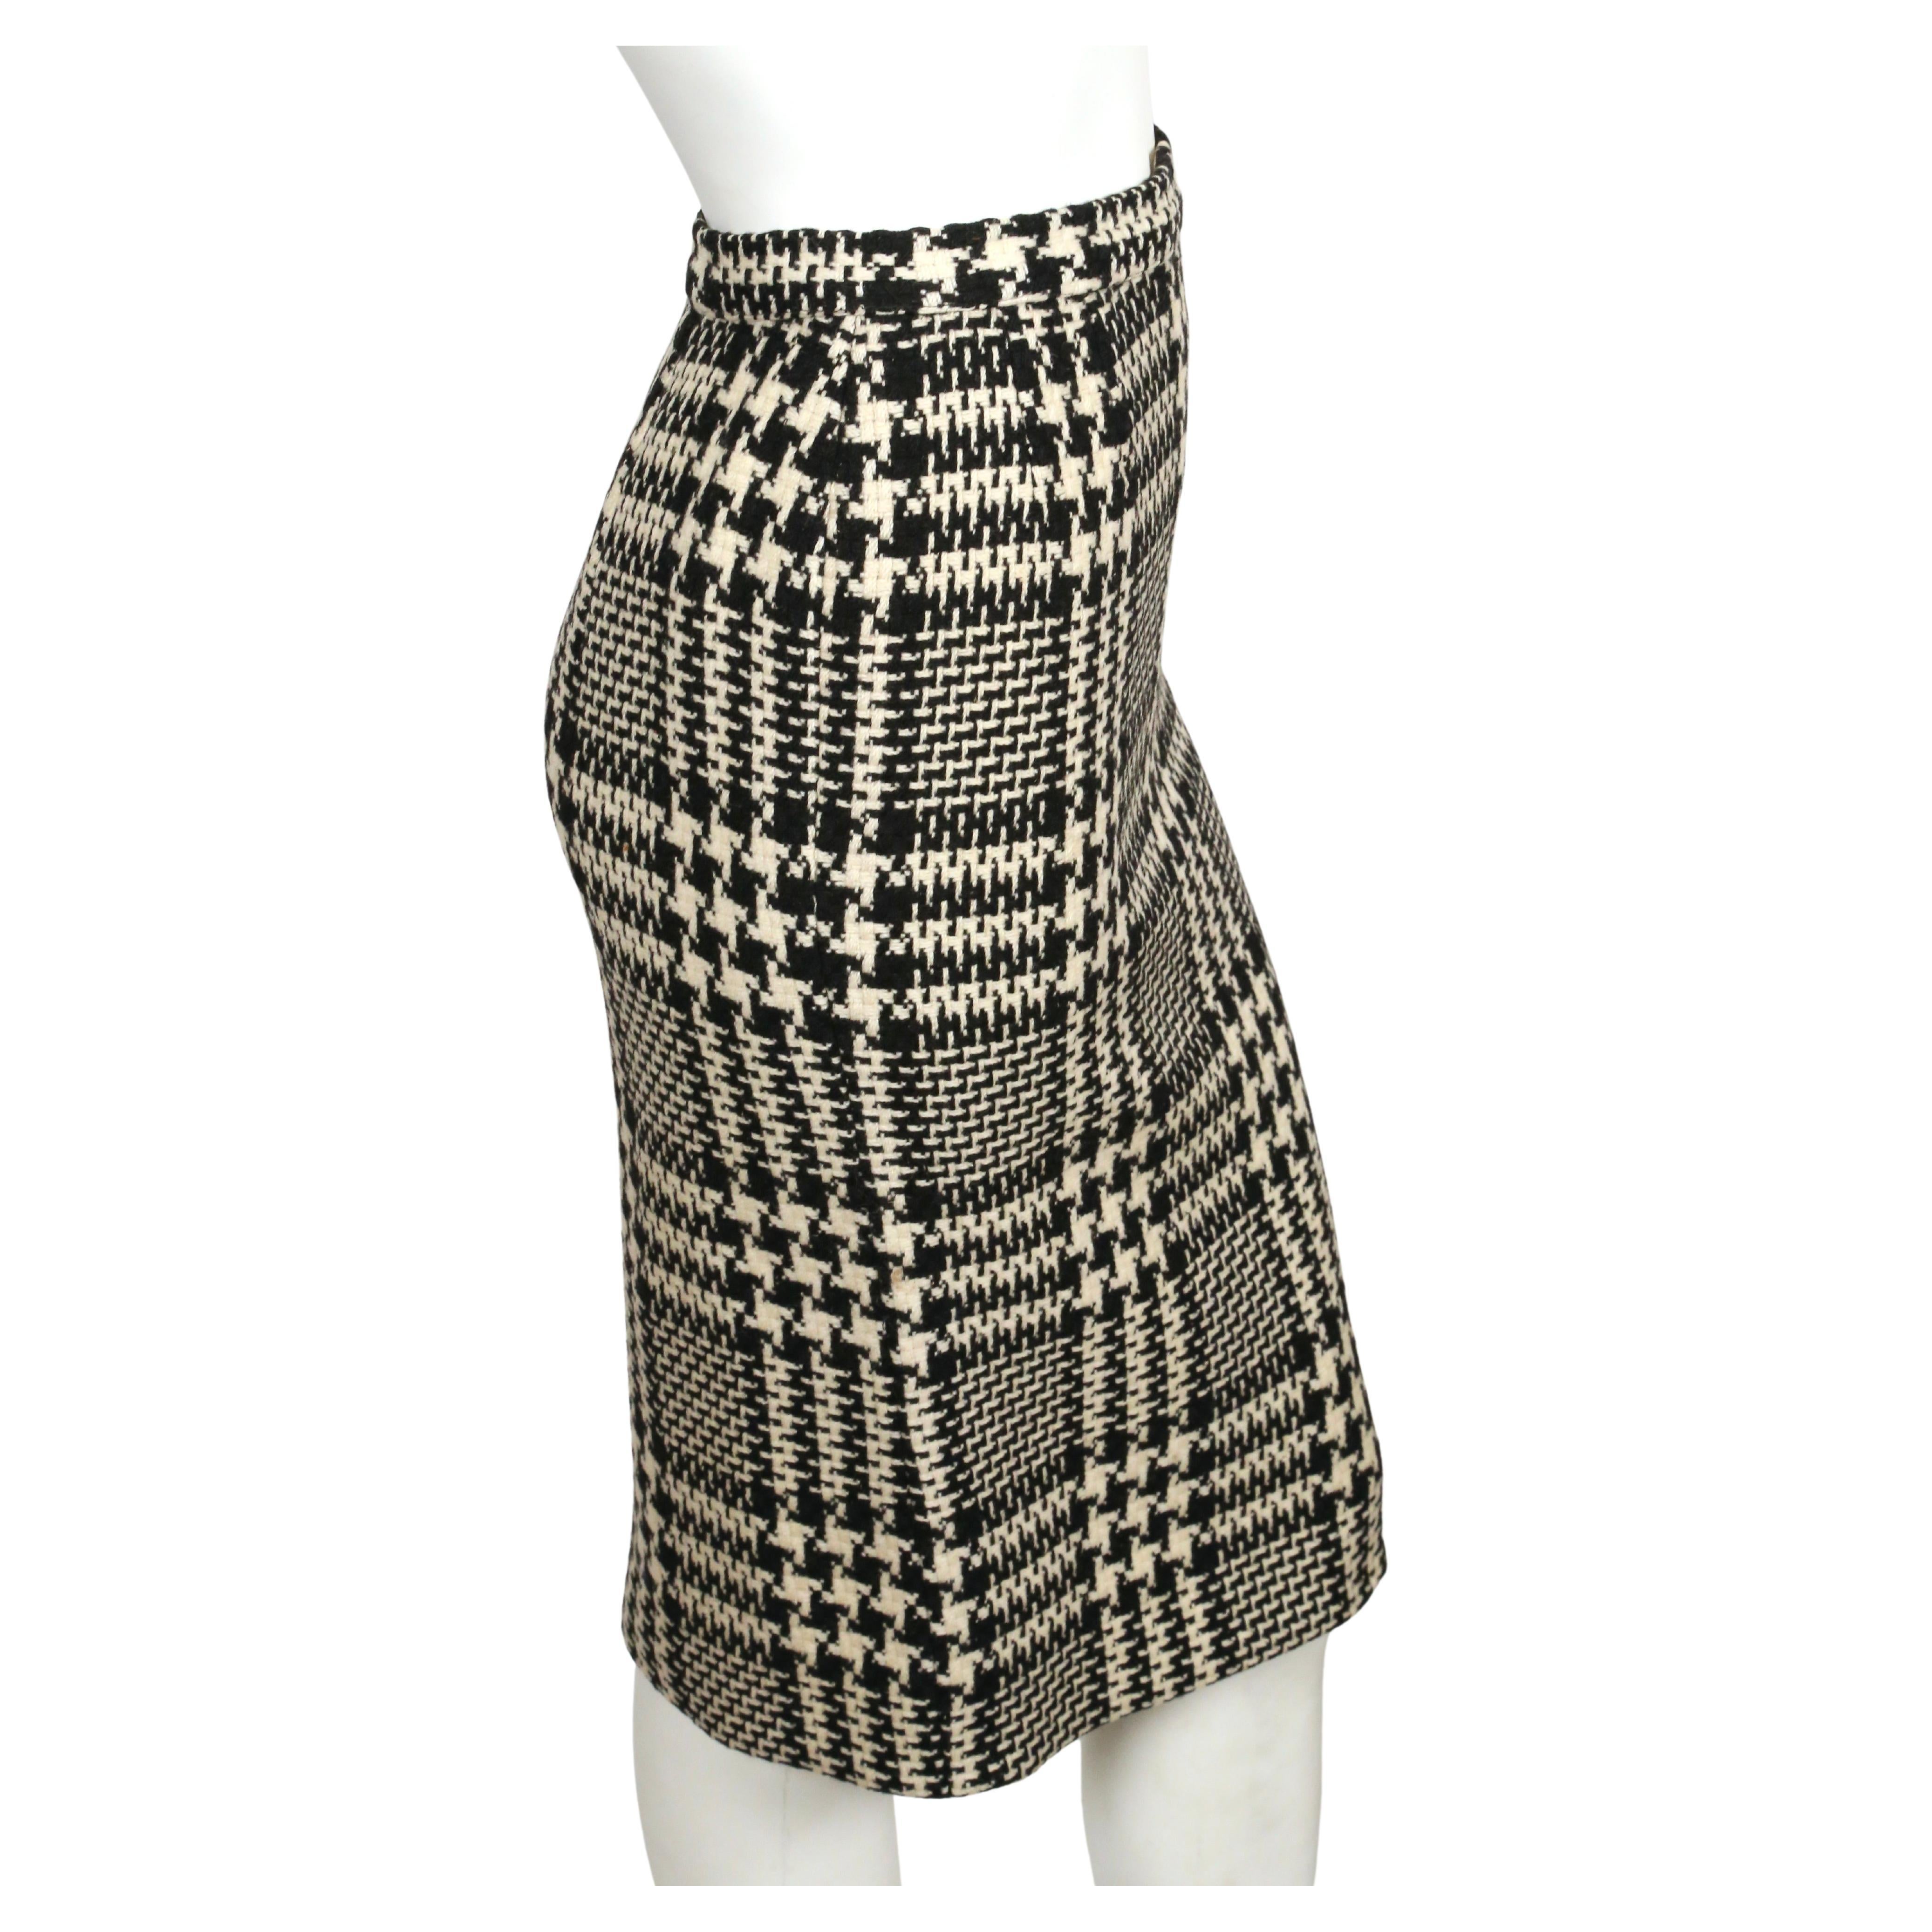 1960's JOSEPH MAGNIN wool houndstooth swing coat with neck tie & skirt For Sale 3